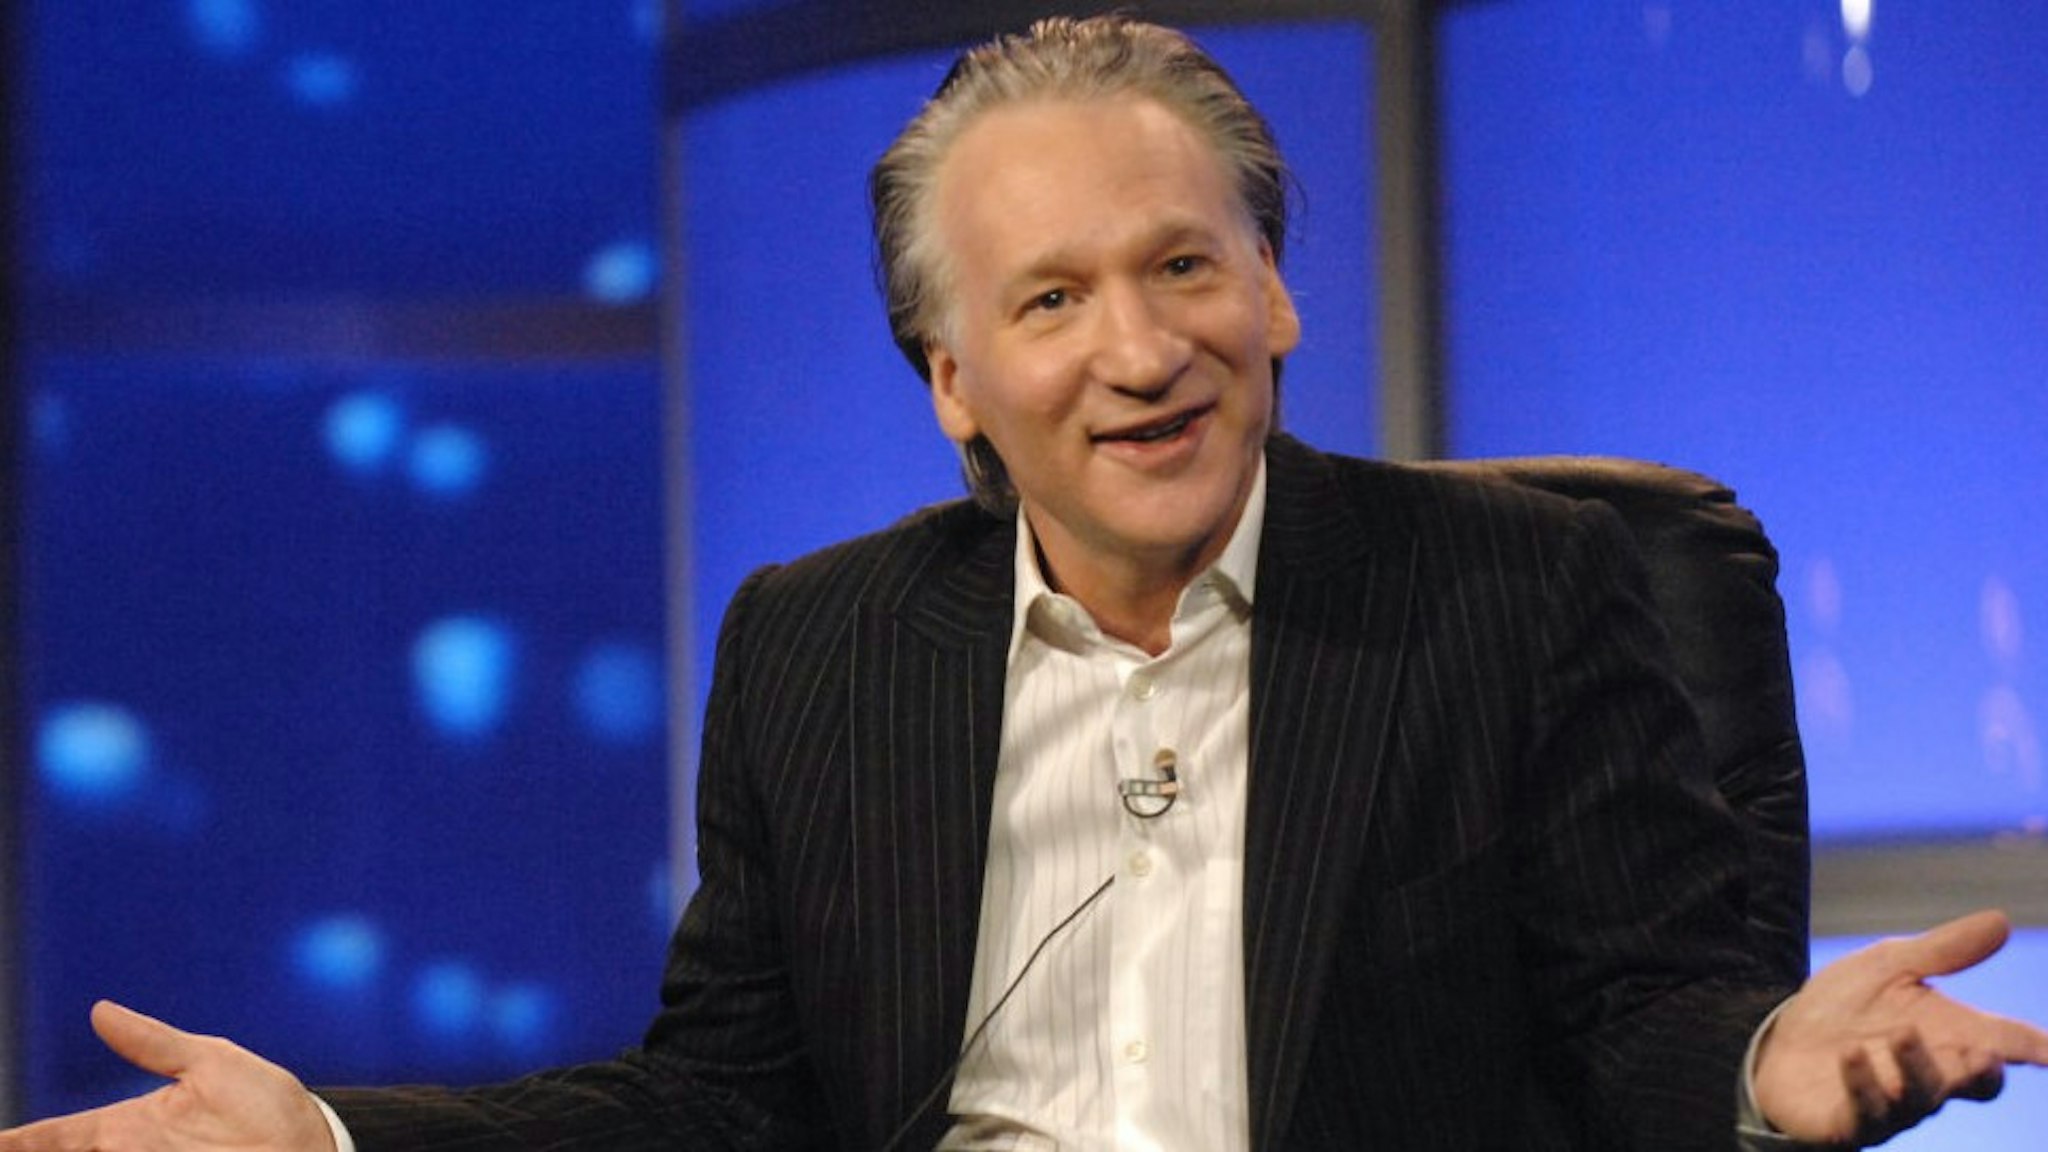 Bill Maher of Real Time with Bill Maher during HBO Winter 2007 TCA Press Tour in Los Angeles, California, United States. (Photo by